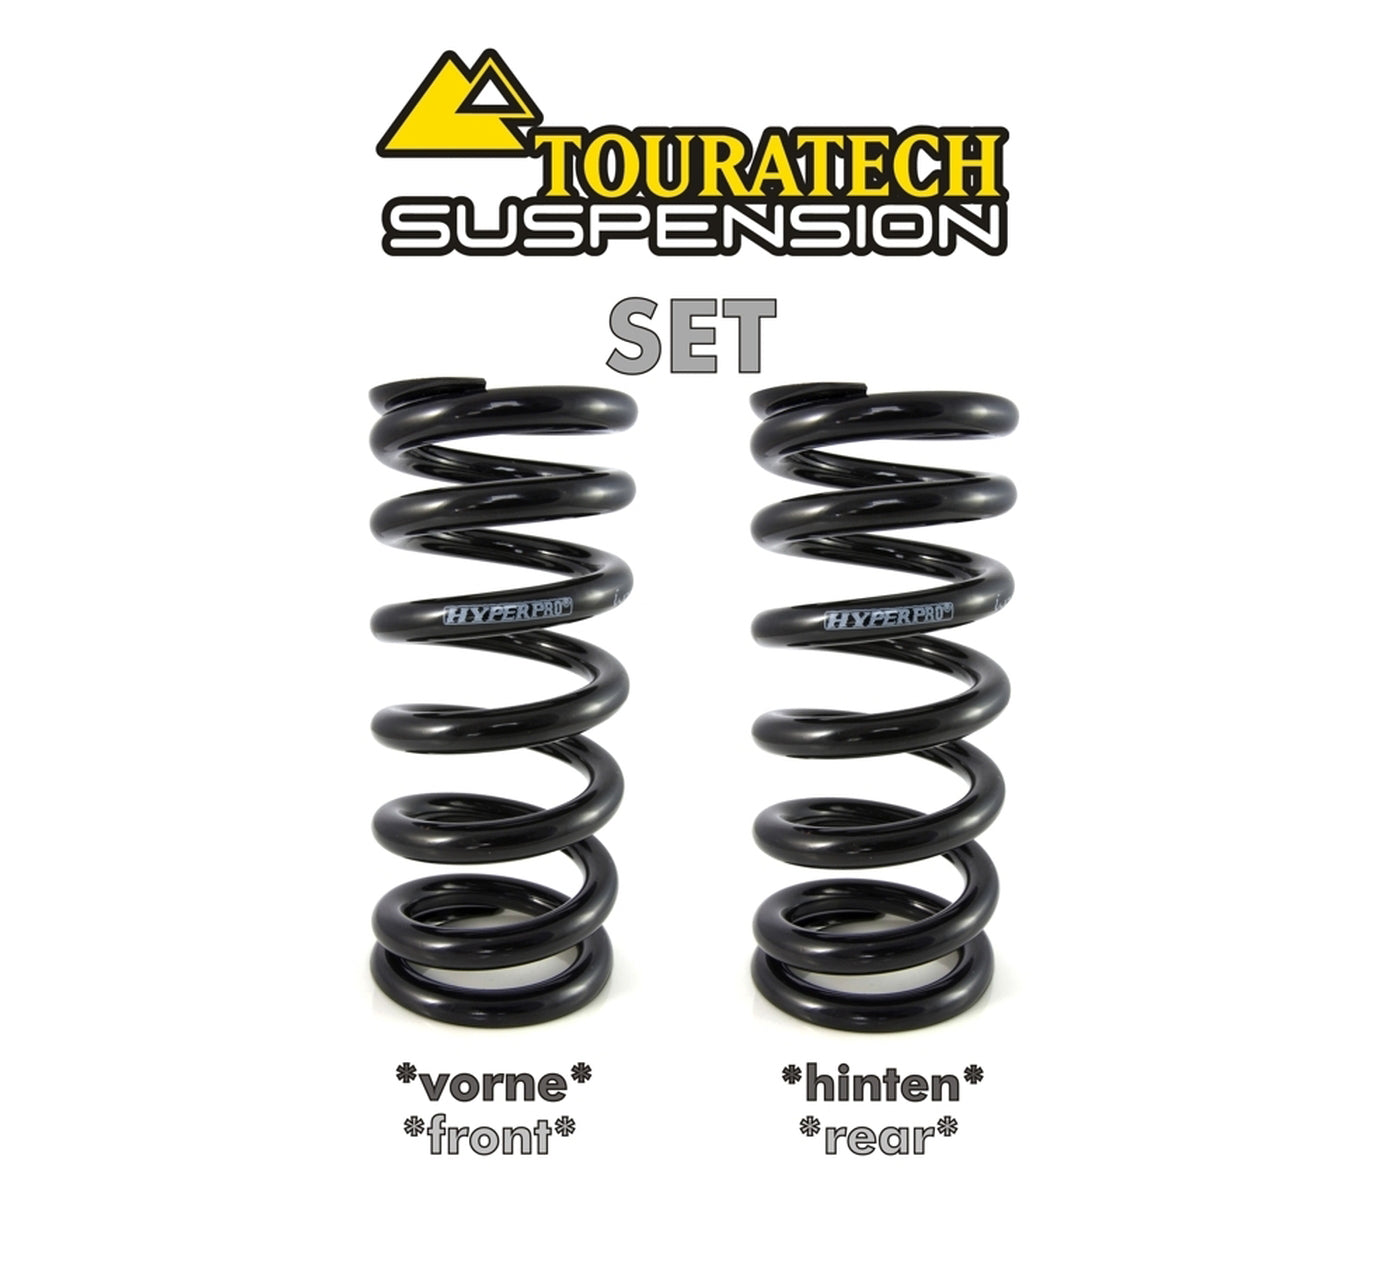 Touratech Suspension progressive replacement springs for BMW R 1100 RS 1997 - 2001